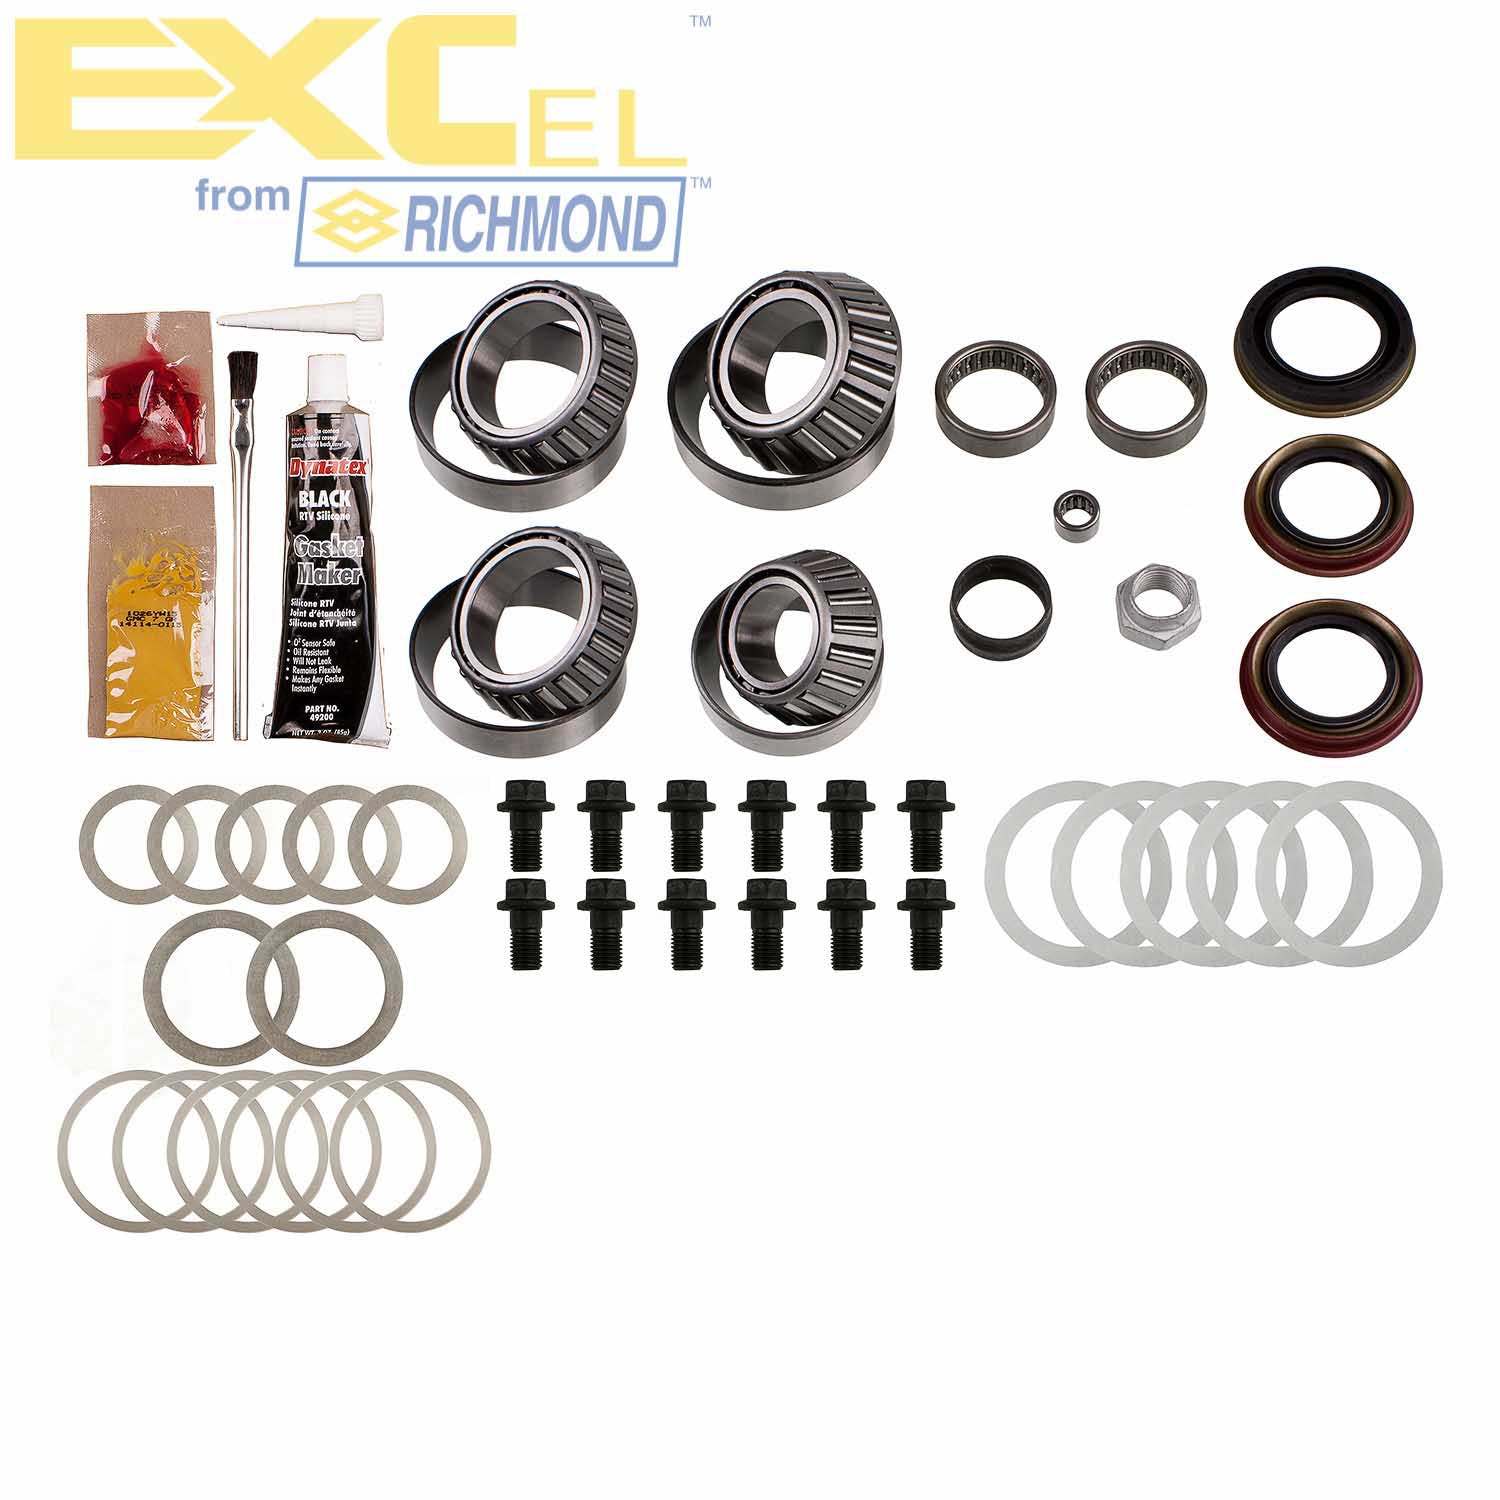 Excel XL-2005-1 Differential Bearing Kit